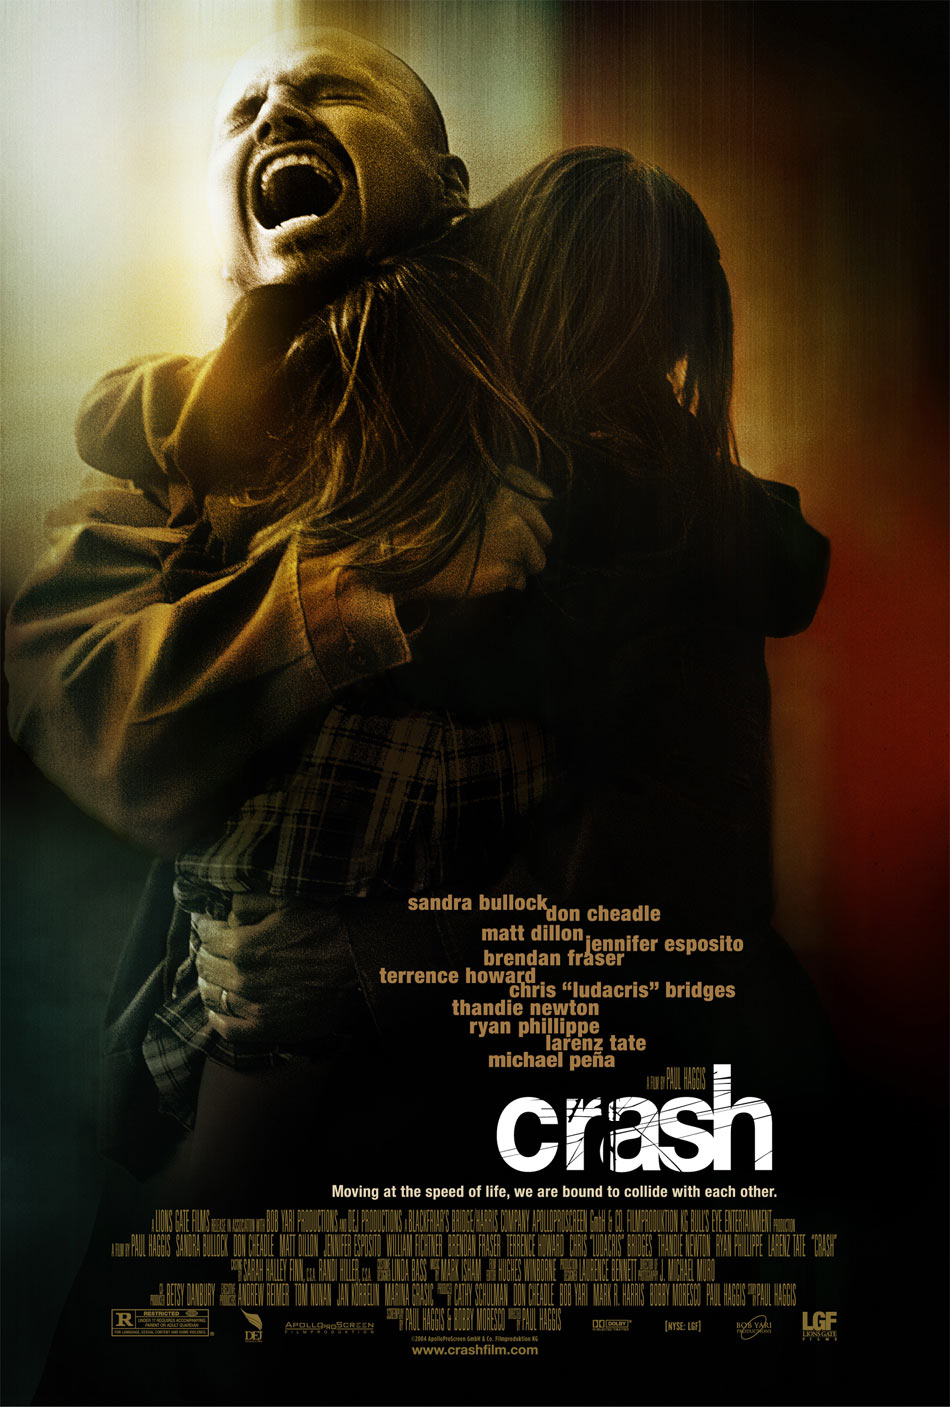 Crash movies in the Netherlands